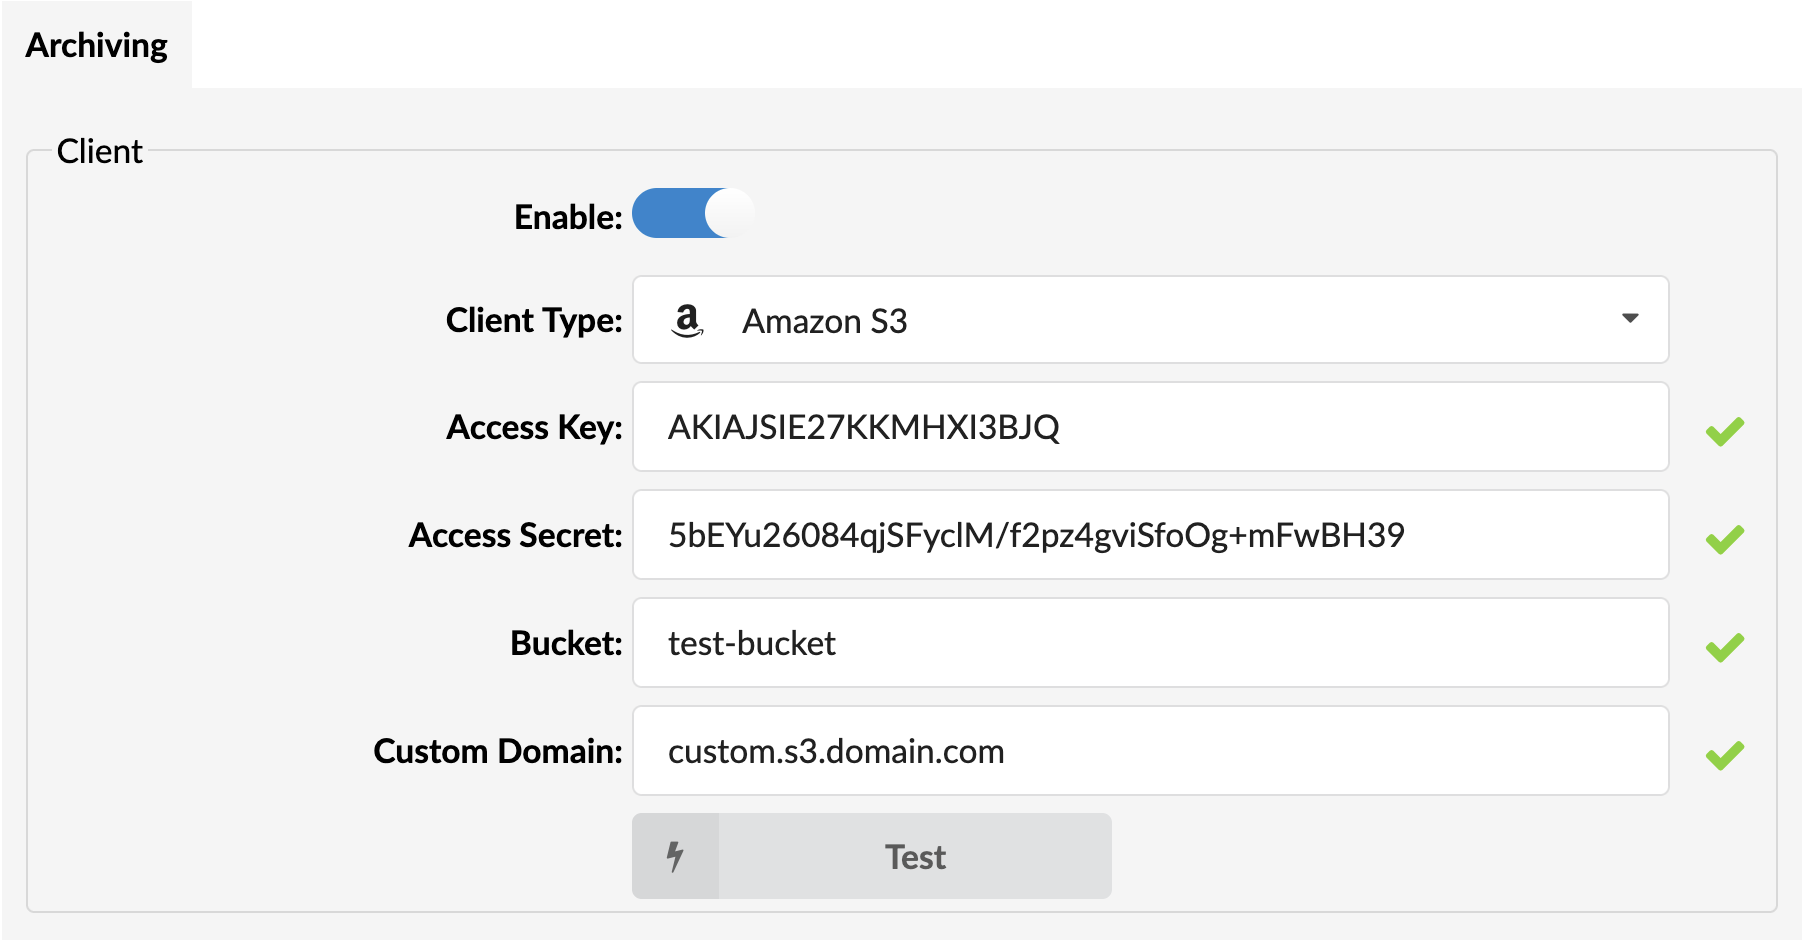 02-archiving-settings-client-amazon-s3.png